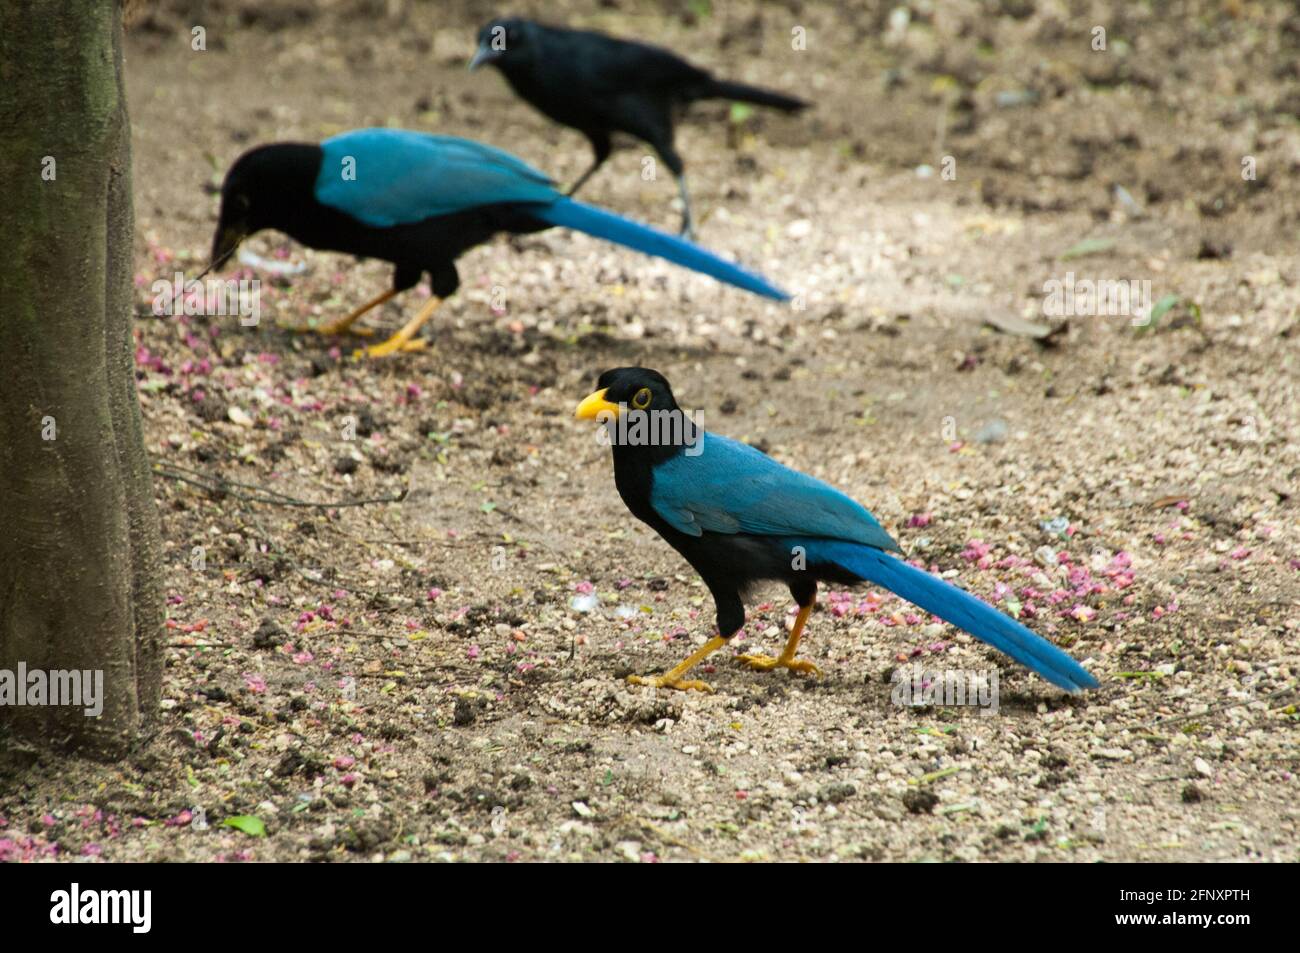 The chara or magpie, Yucatecan Cyanocorax, is a blue bird of the Yucatan Peninsula, lives in the forest and coastal scrub, feeds on insects and corn. Stock Photo